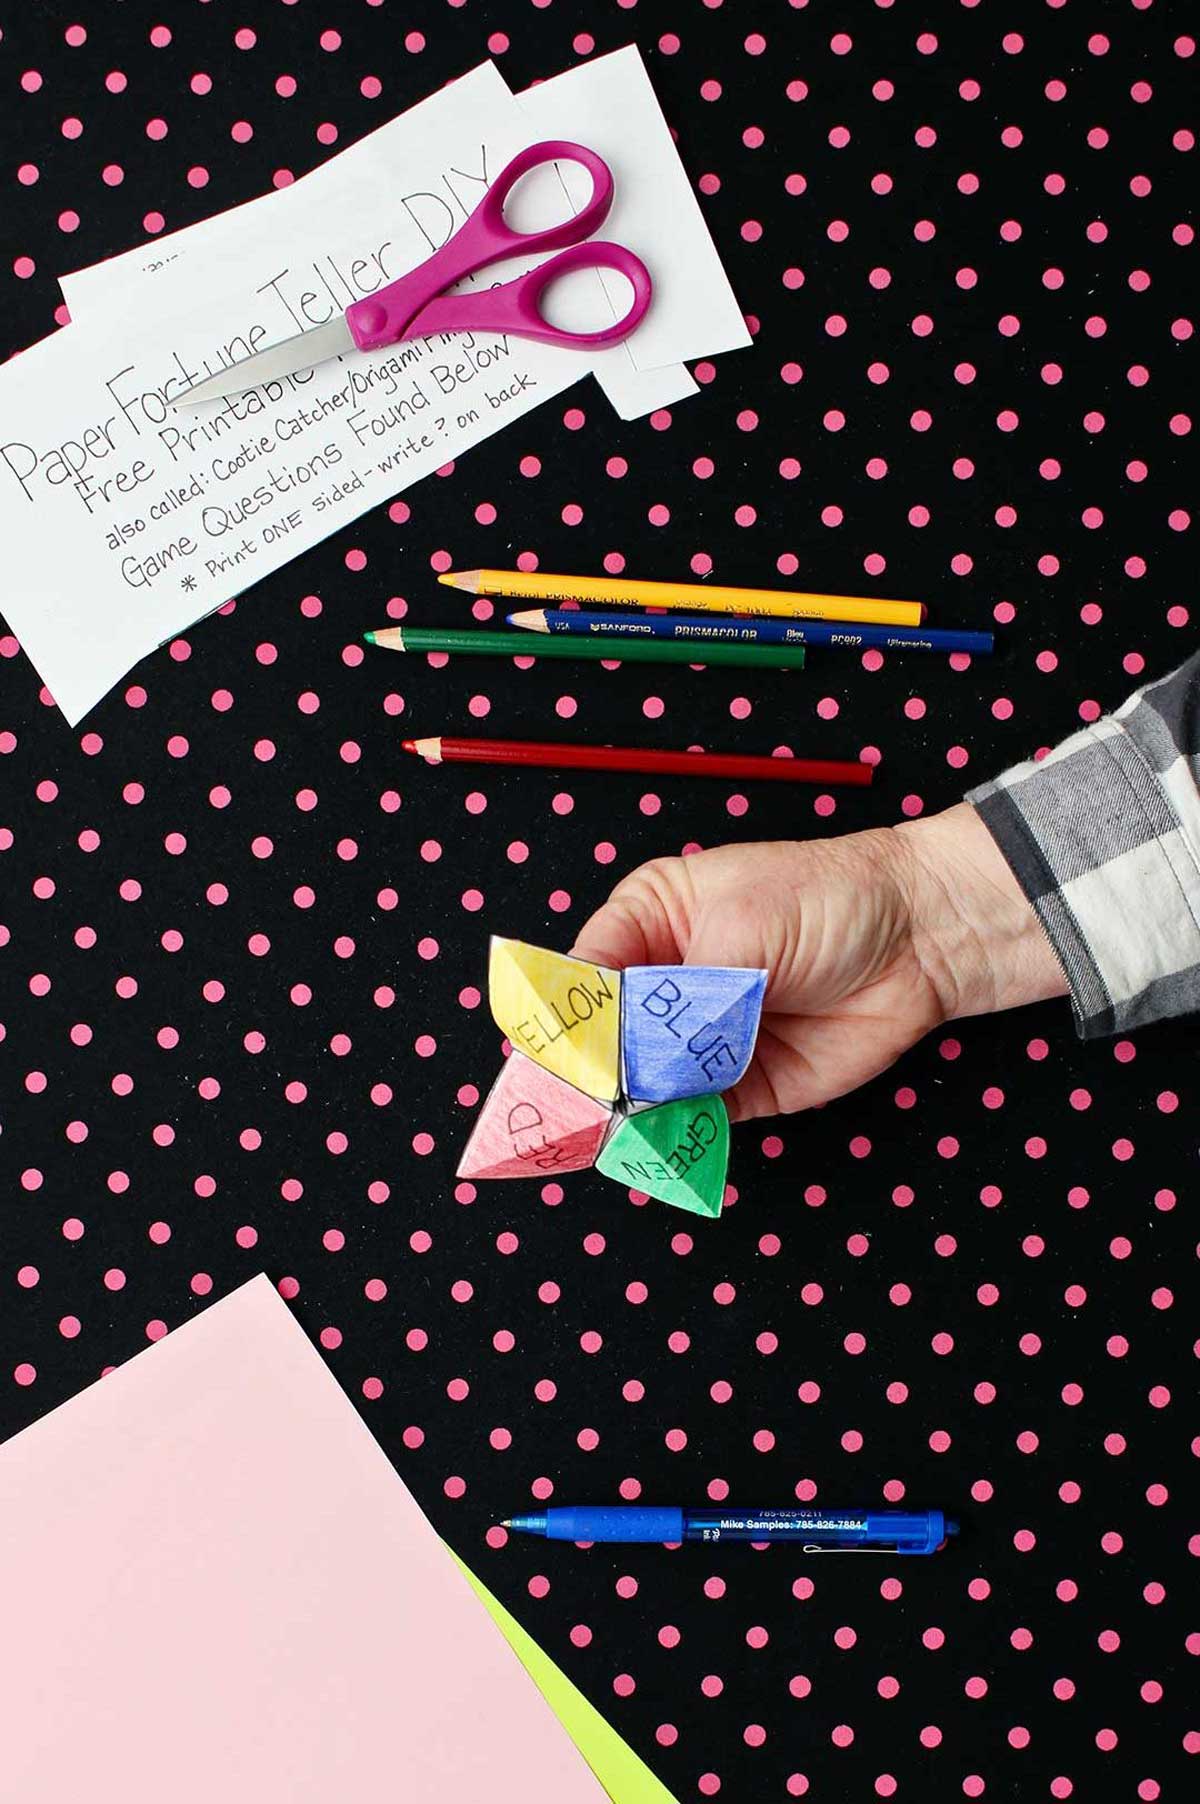 Hand holding completed and colored printout of paper fortune teller with paper, scissors and colored pencils resting on black and pink polka dotted background.